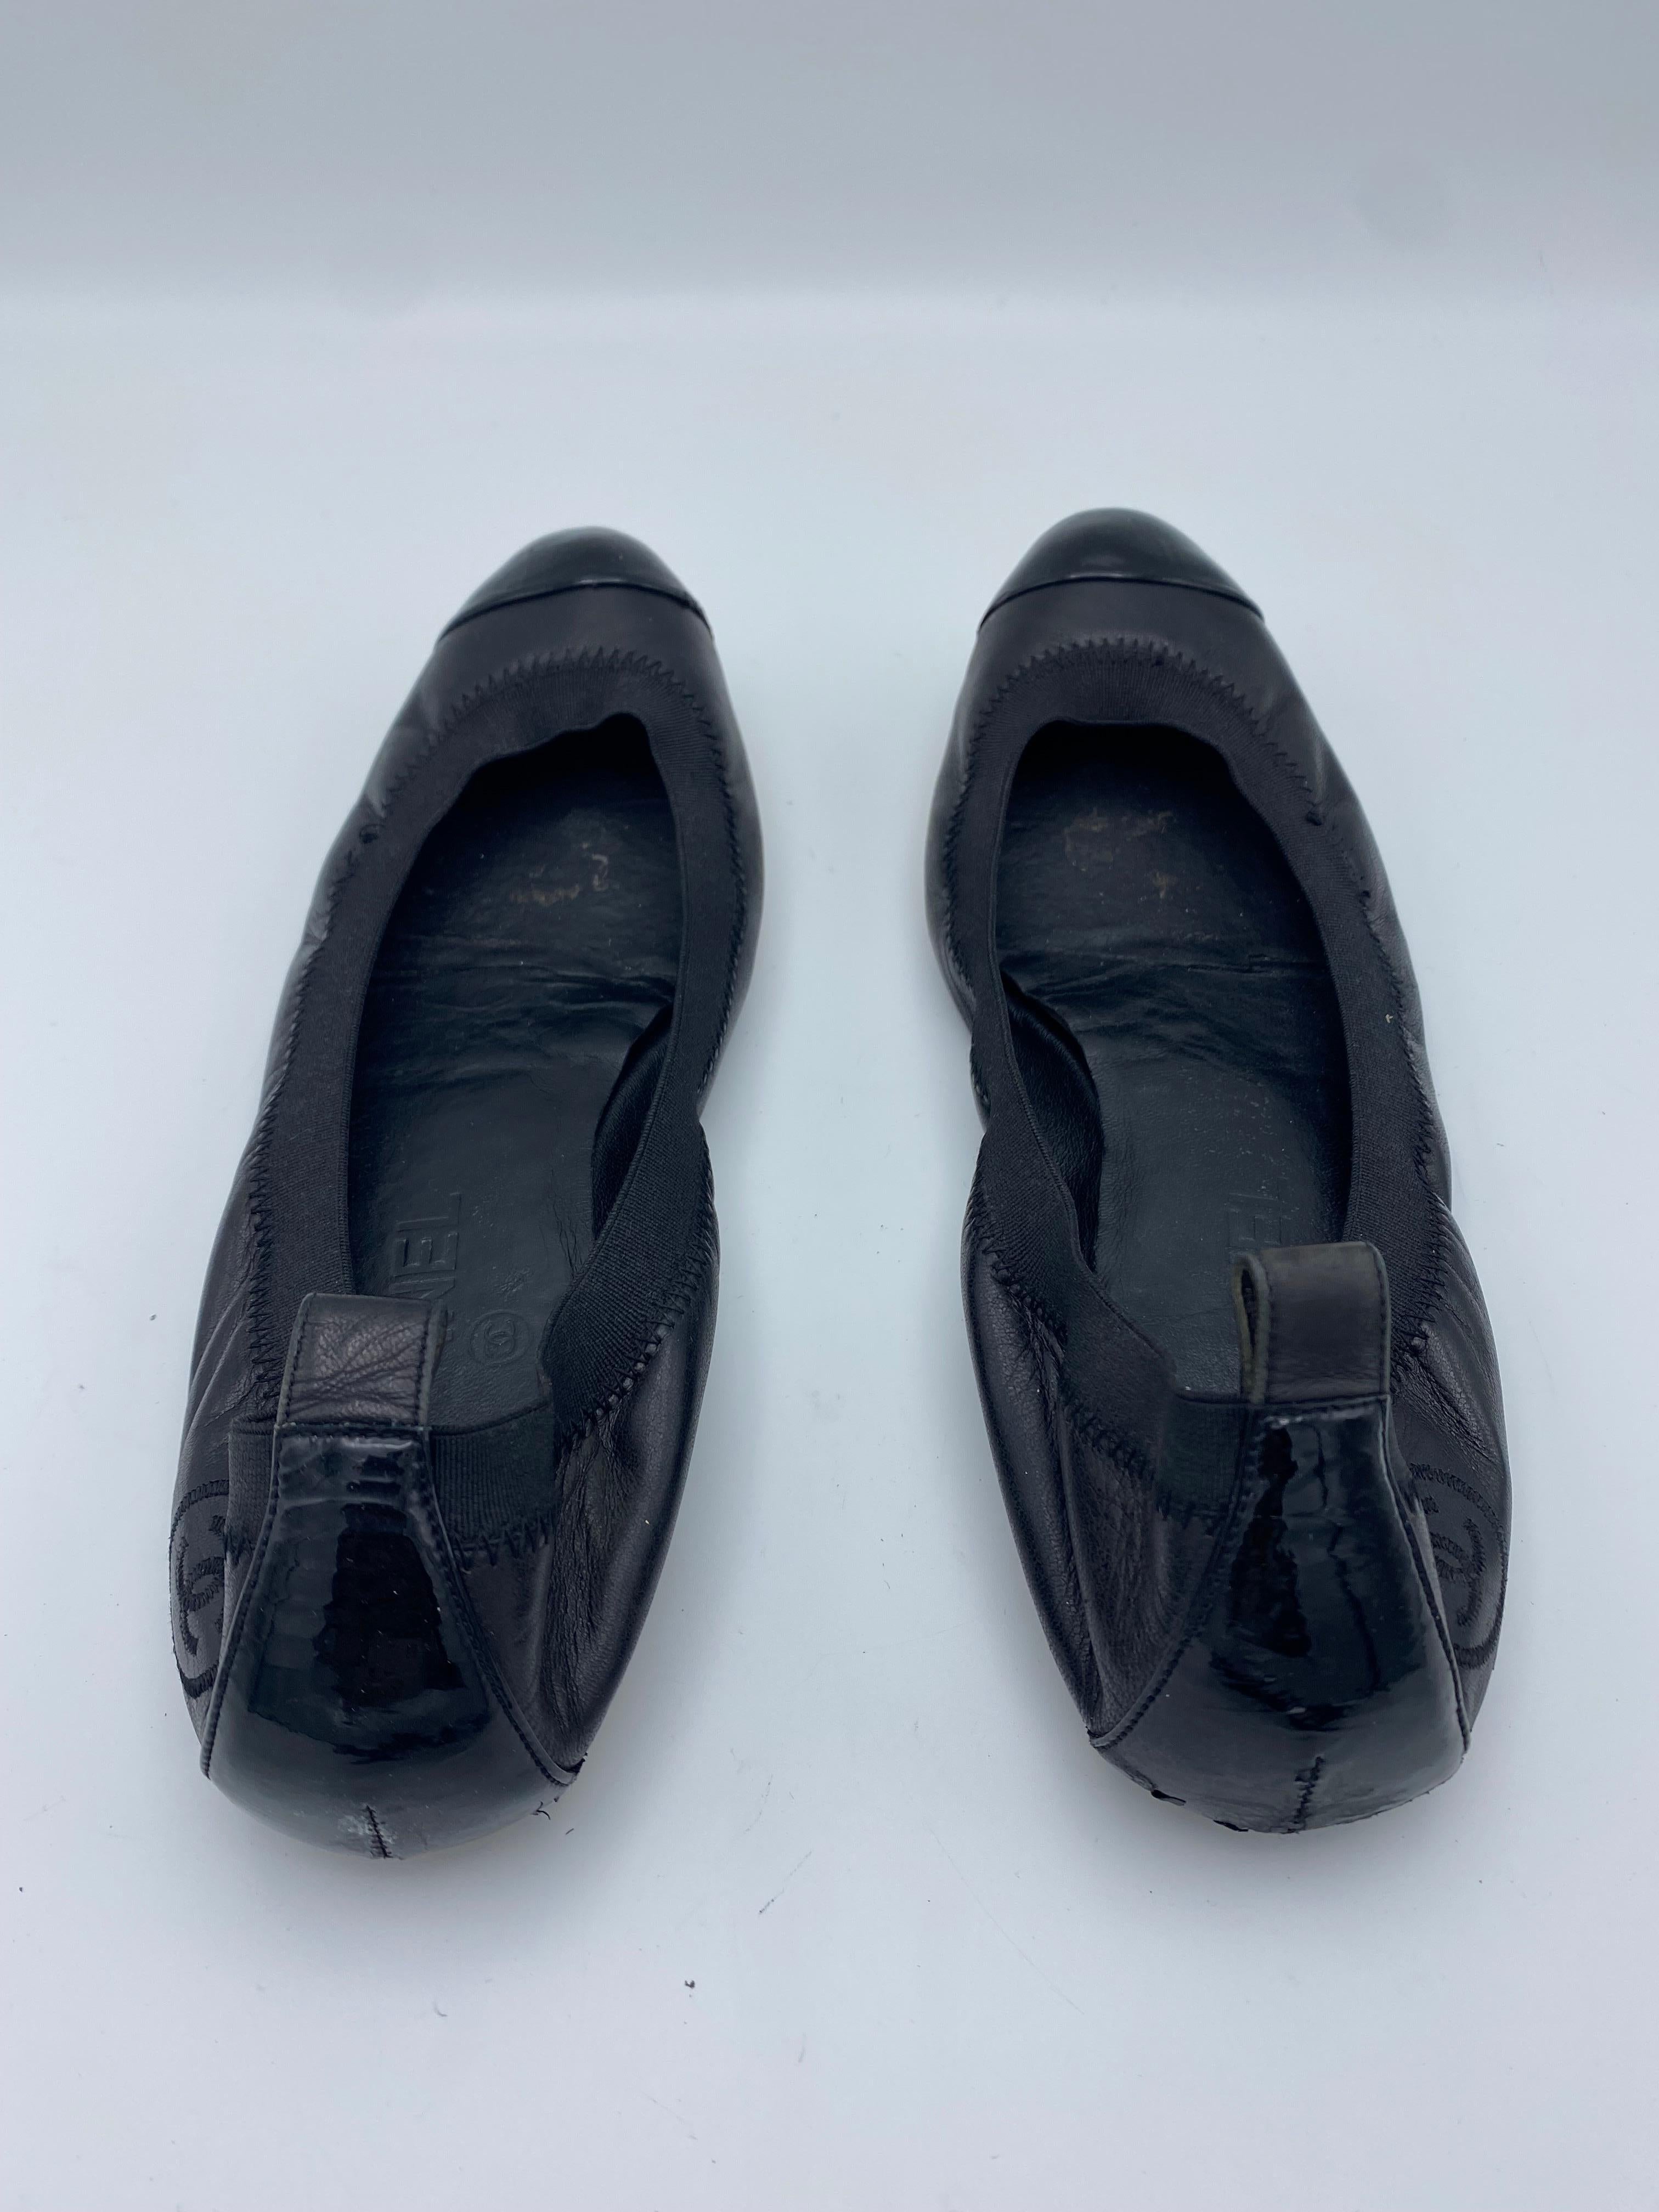 Chanel Black Leather Ballet Flat Shoes, Size 38 In Fair Condition For Sale In Beverly Hills, CA